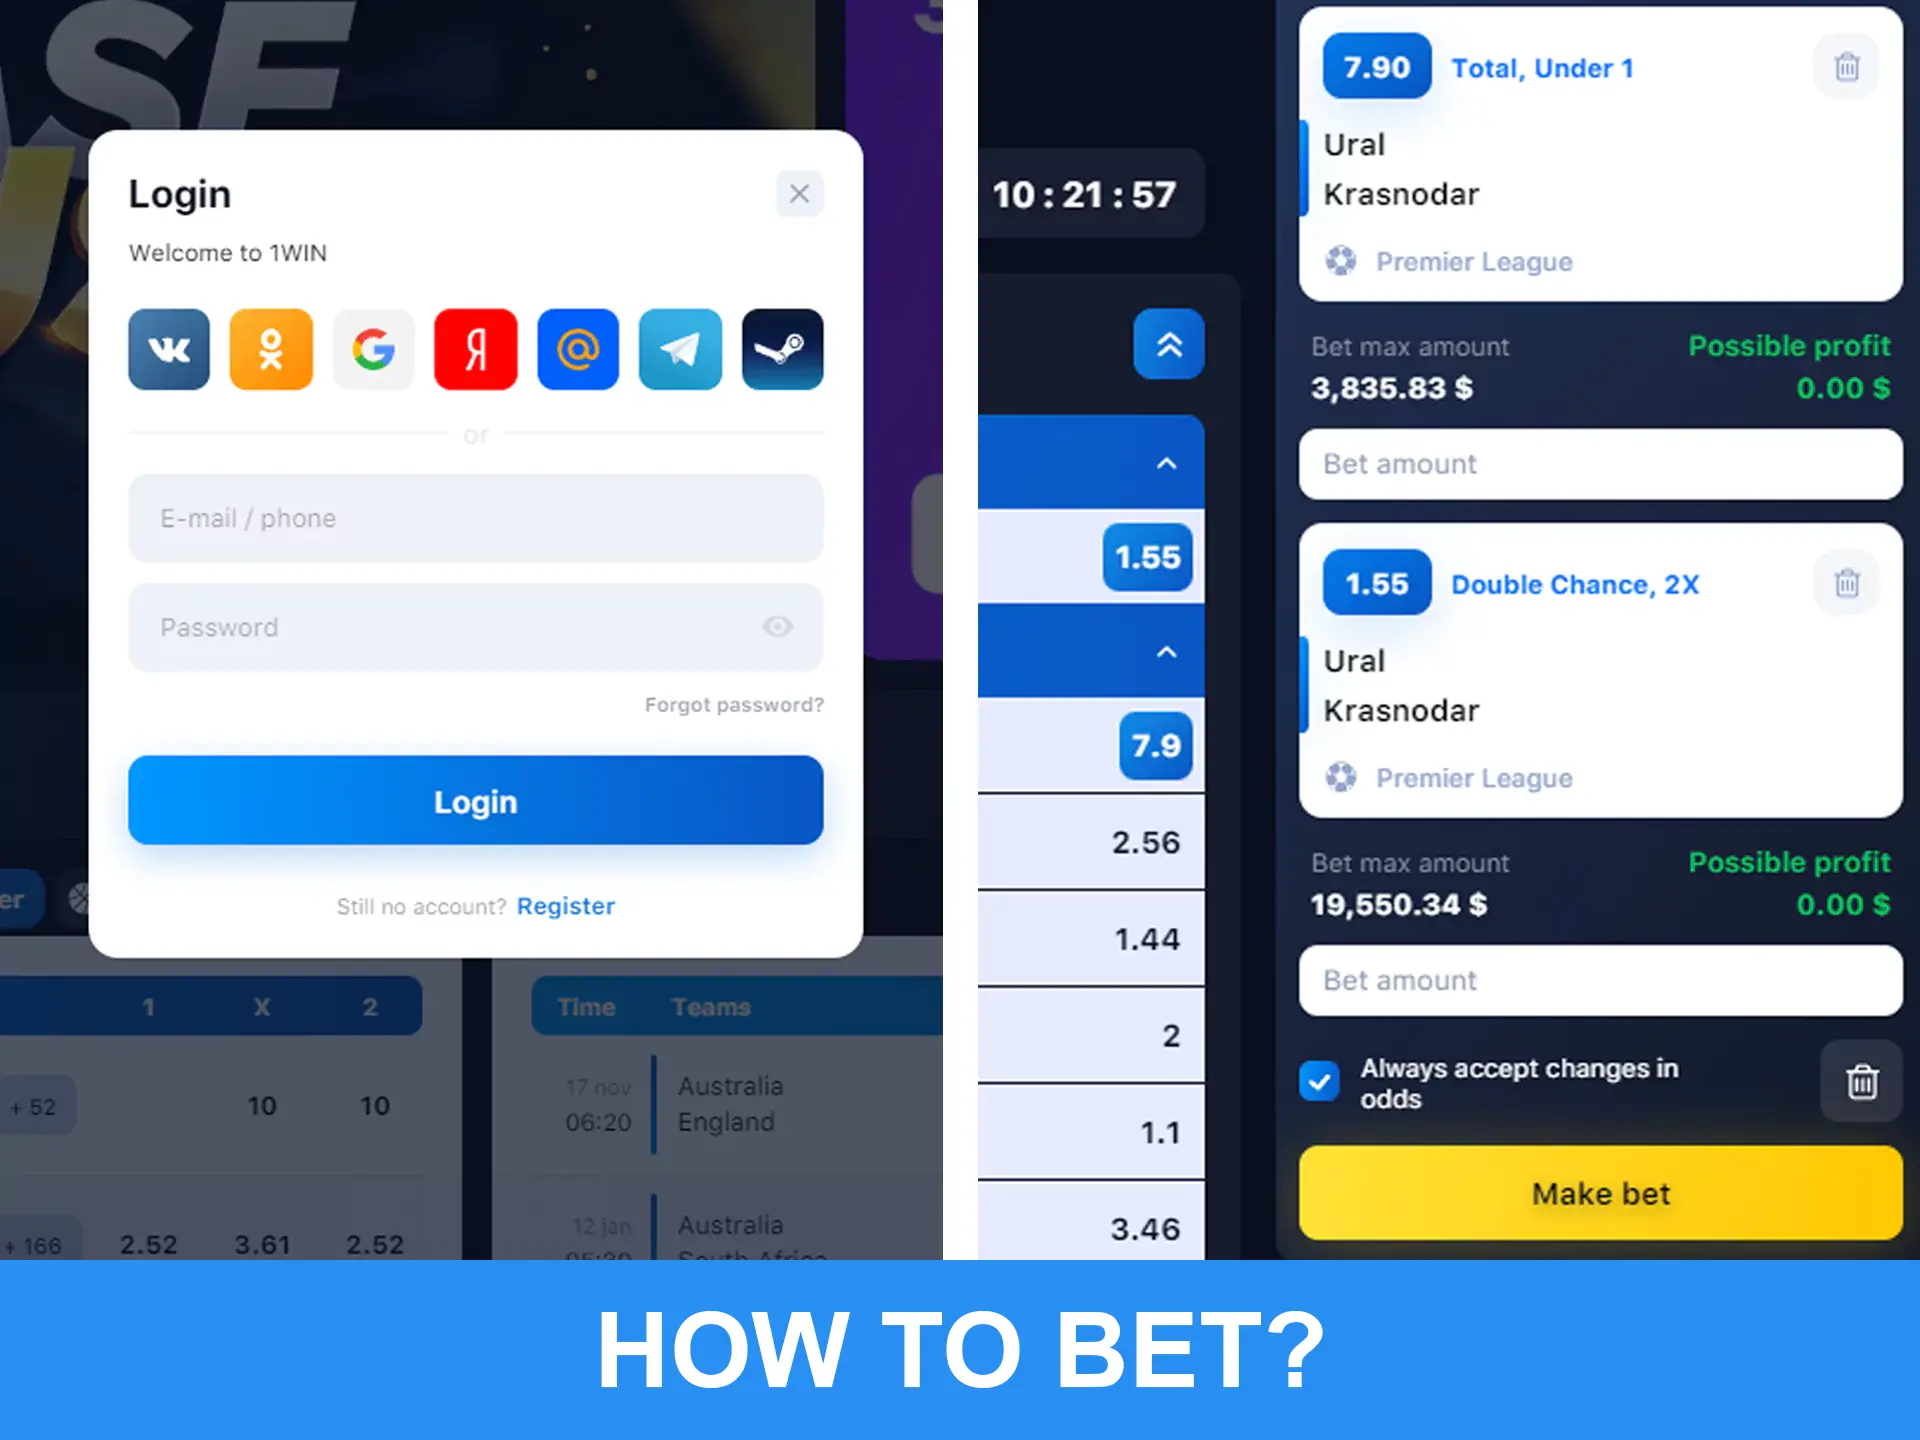 Use the menu with tournaments to bet at 1Win.